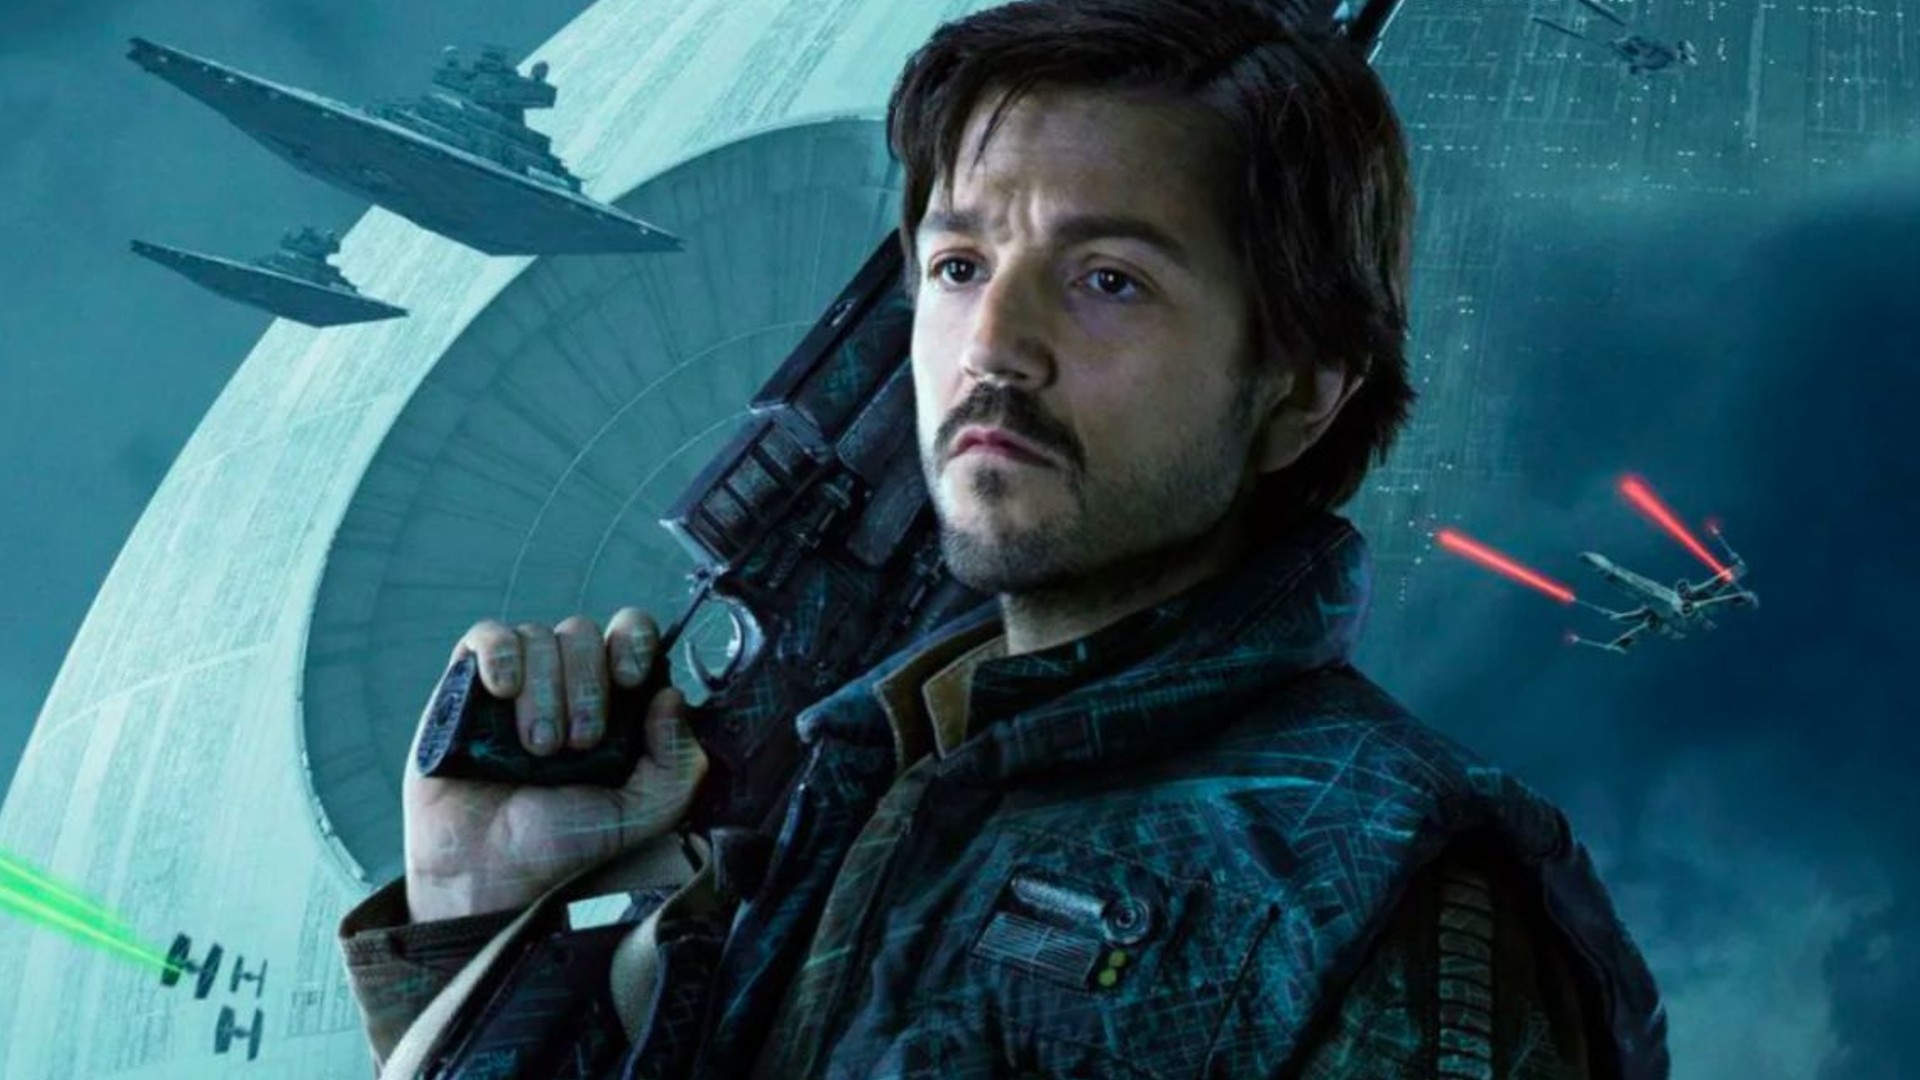 Andor (TV Series): A spy thriller focused on the character Cassian, played by Diego Luna. 1920x1080 Full HD Wallpaper.